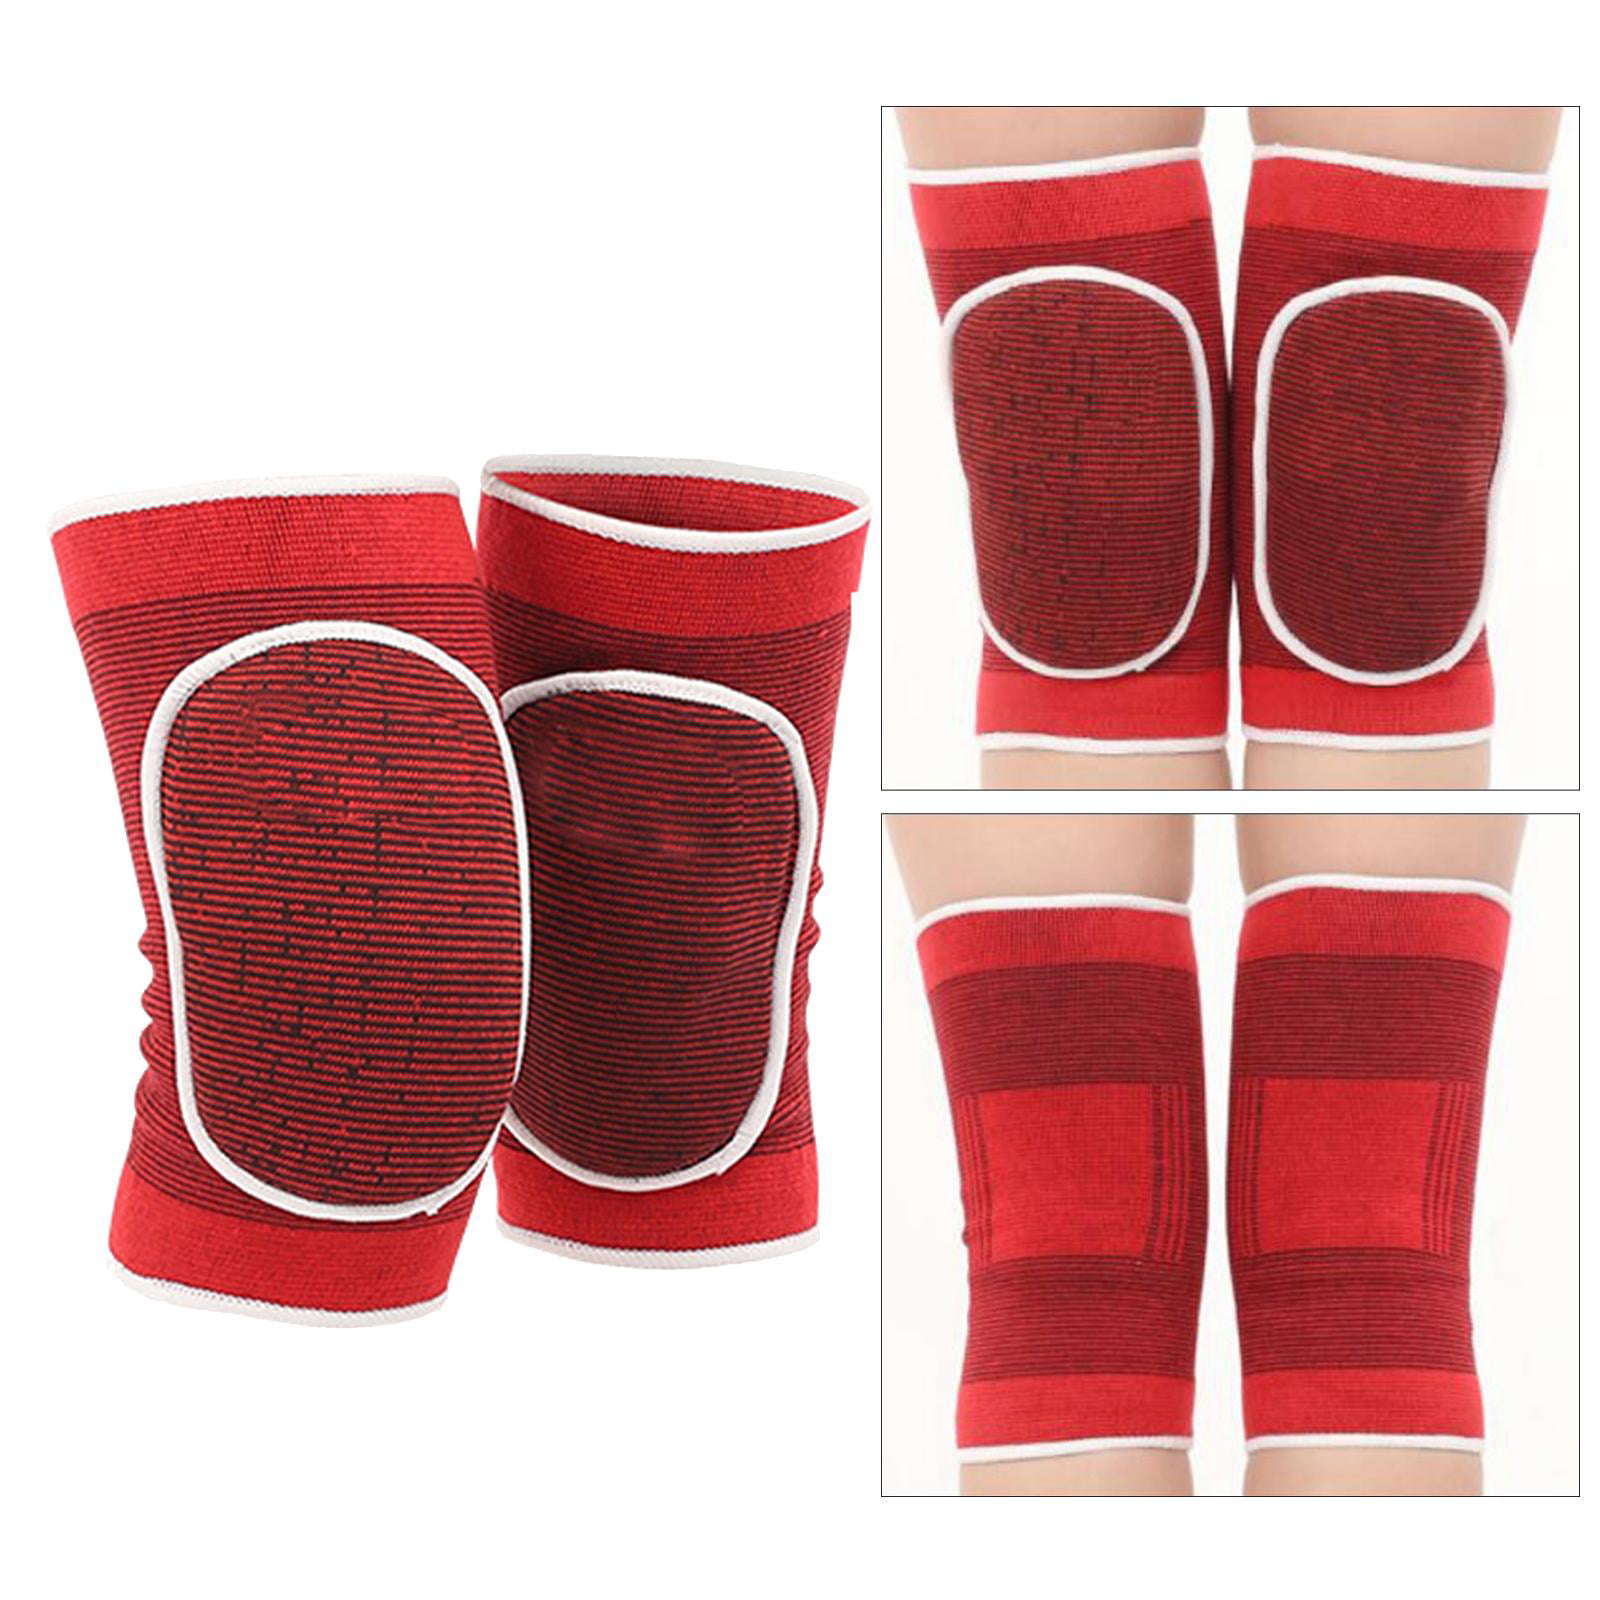 EULANT Knee Pads, Thick Sponge Collisioned Kneepads for Sports & Work,  Protective Knee Support Sleeve for Basketball Wrestling Football Volleyball